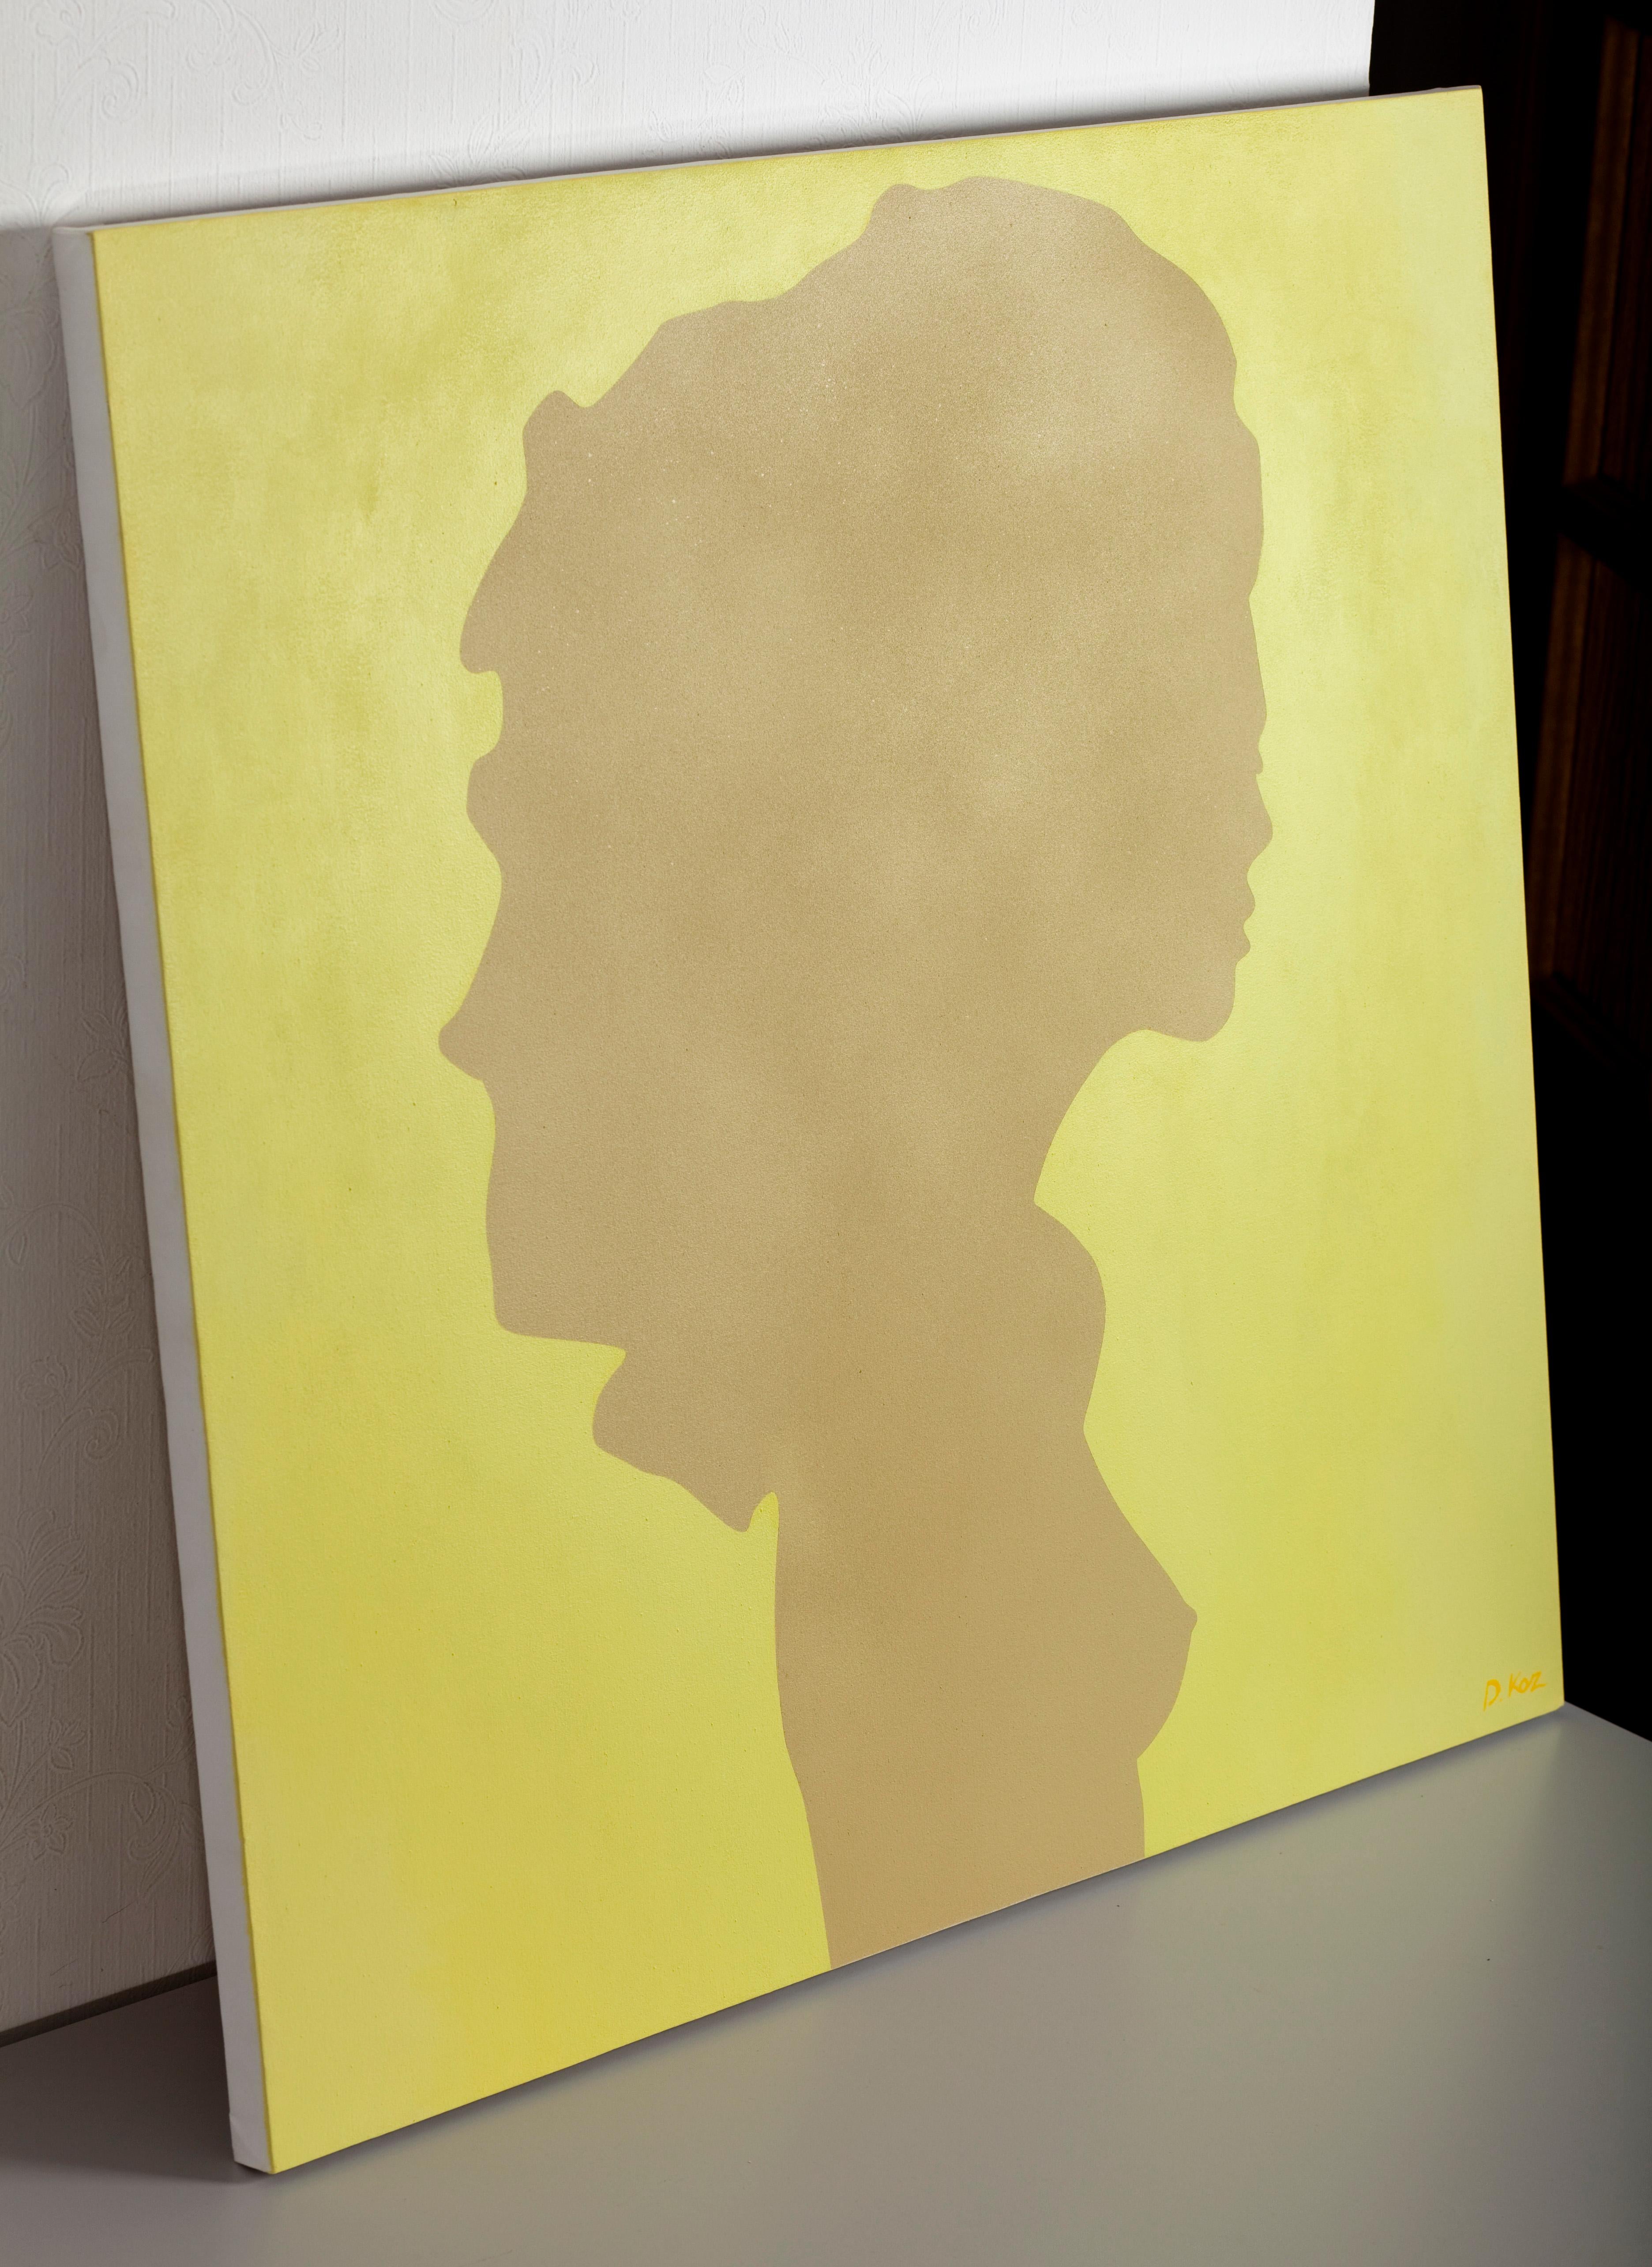 Shadow of a young girl - Pop Painting, Acrylic on Canvas, Daniel Kozeletckiy For Sale 2